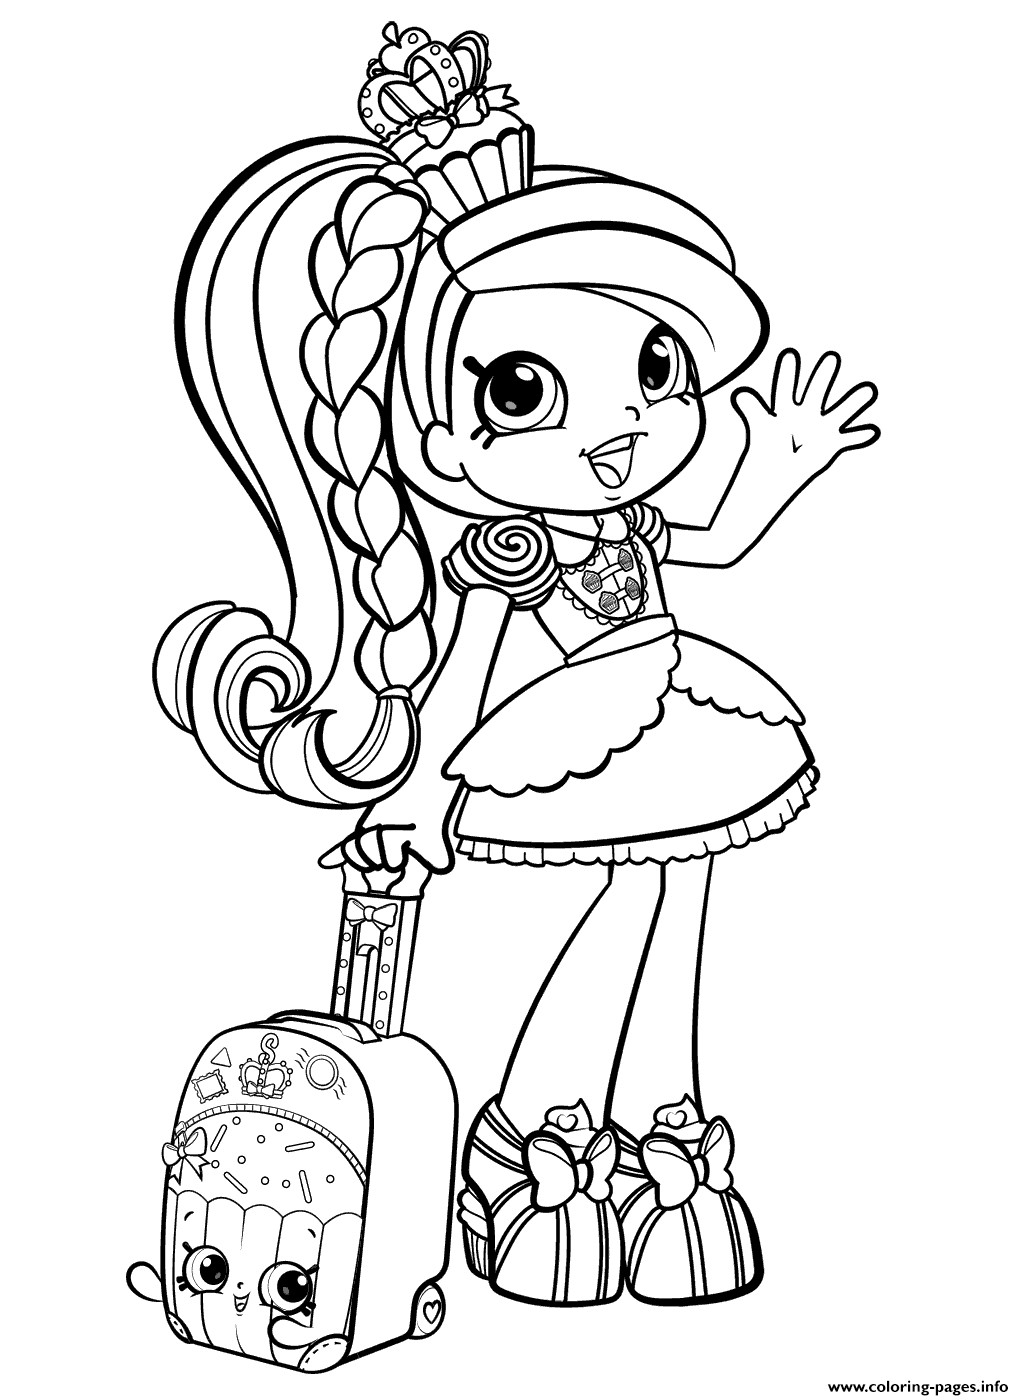 Coloring Pages For Girls Shopkins
 Shopkins Girl In World Vacation Season 8 Coloring Pages